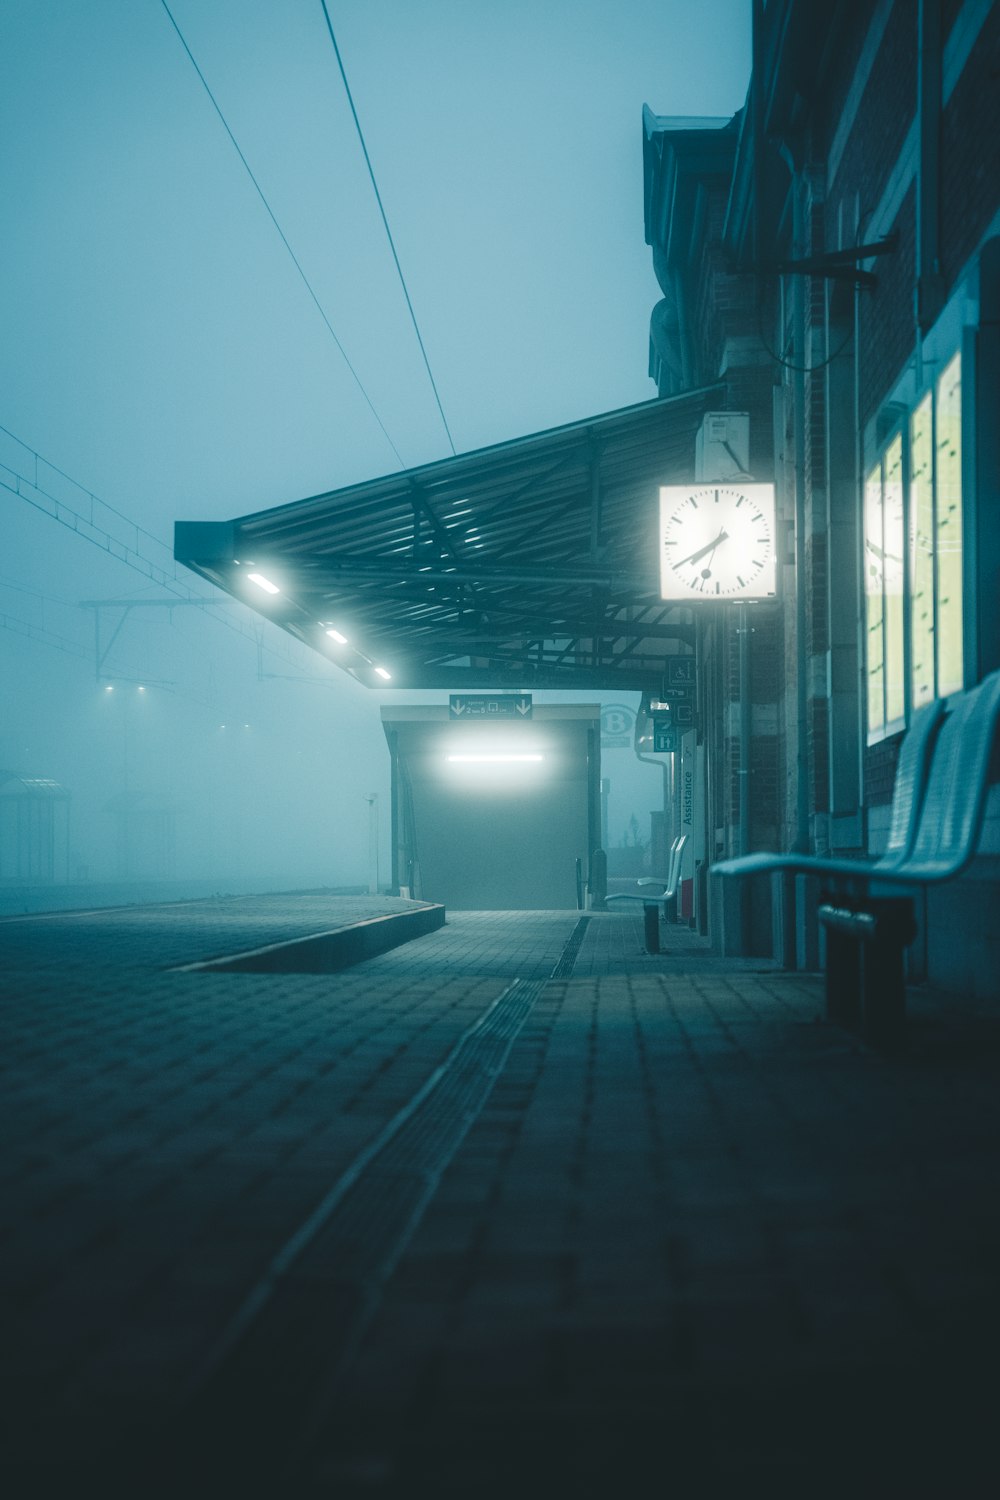 a train station with a clock on a foggy day